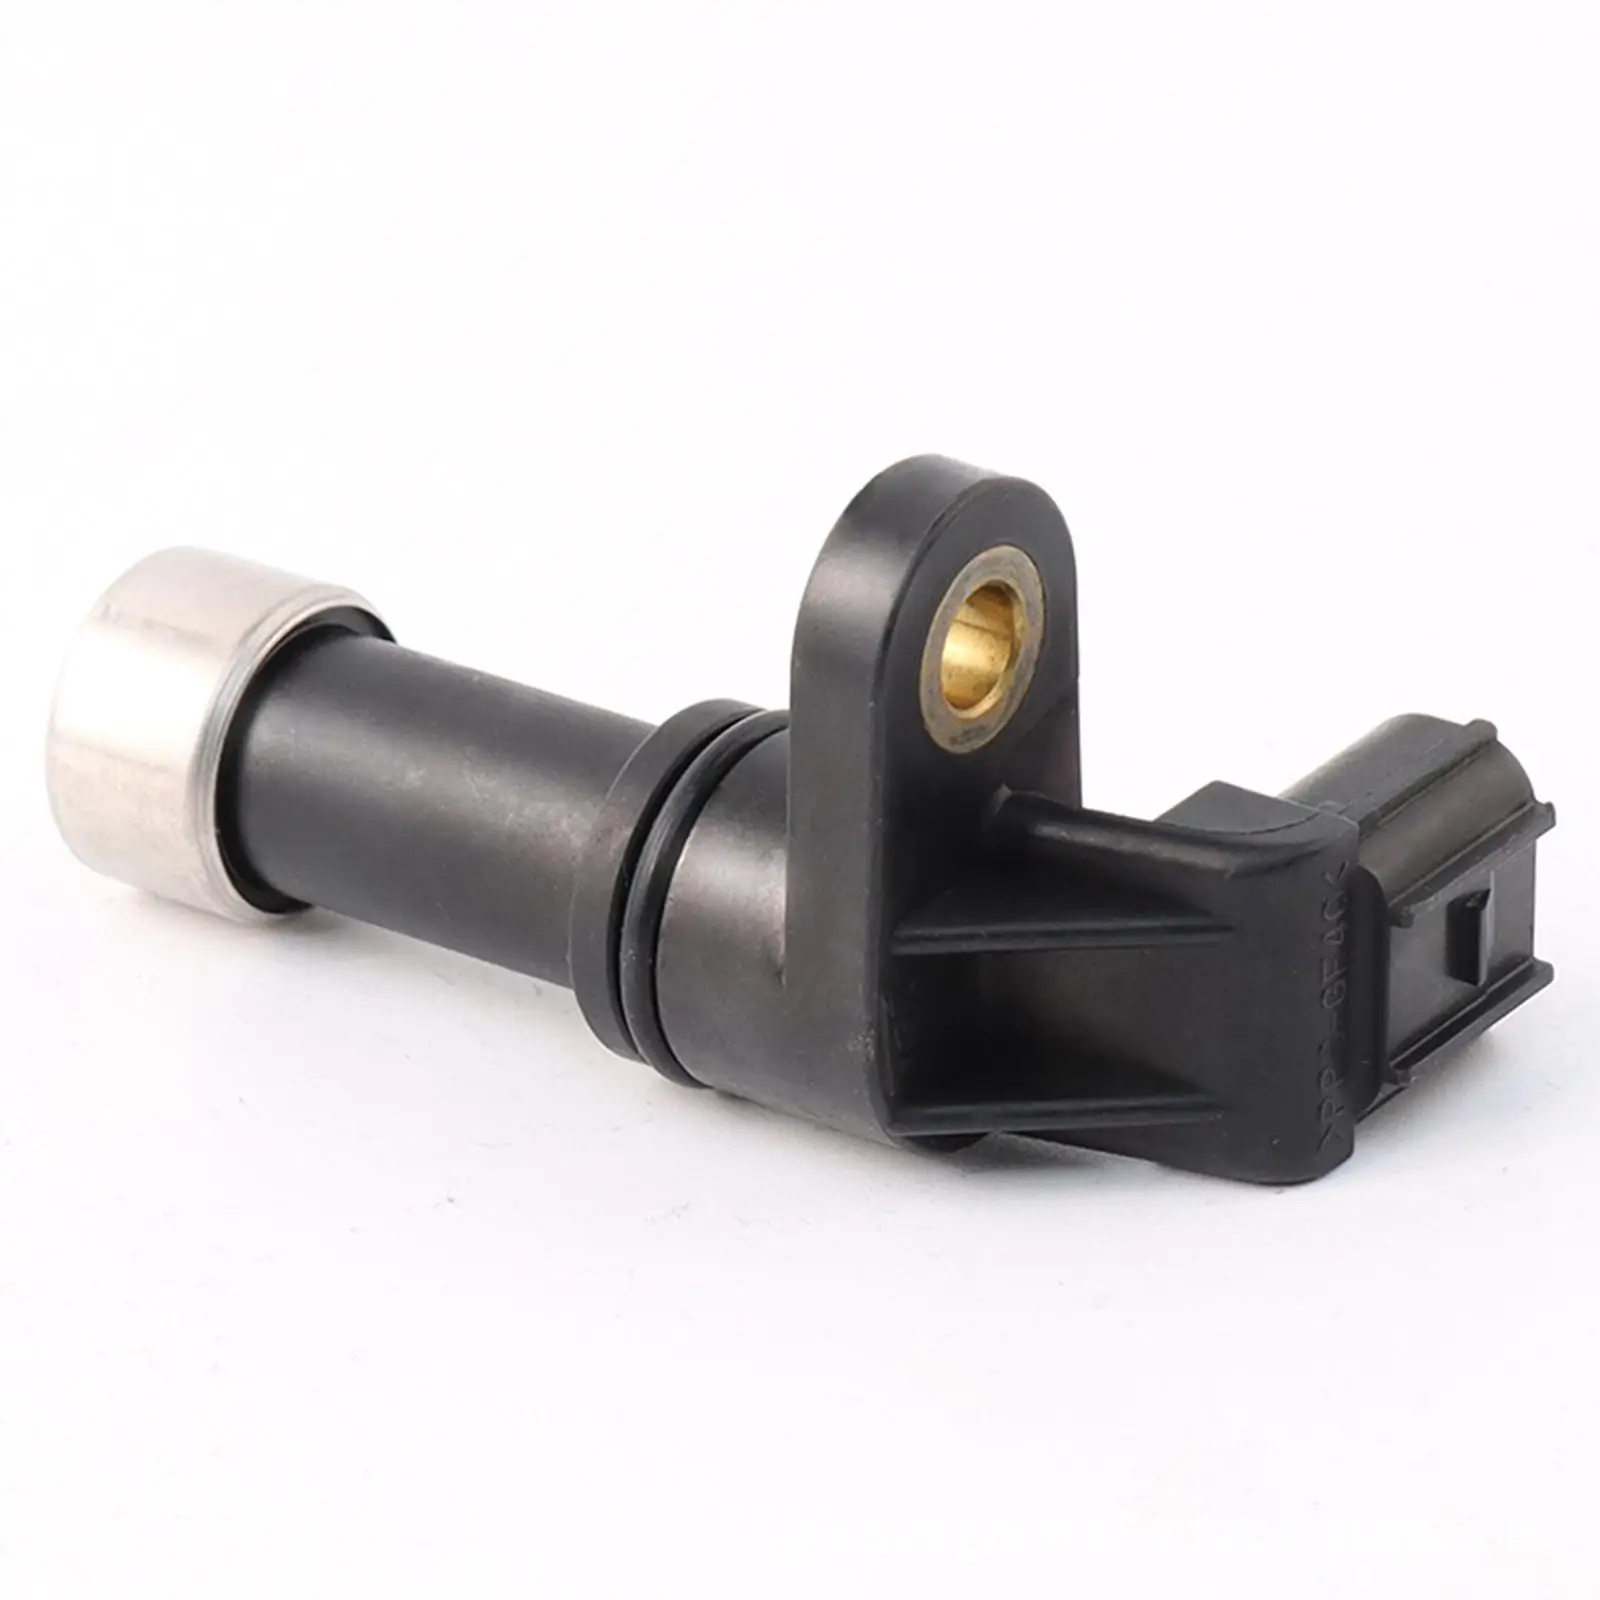 Trans Speed Sensor 28810-Rpc-003 for Honda Civic Fit Replace Parts Easy Installation